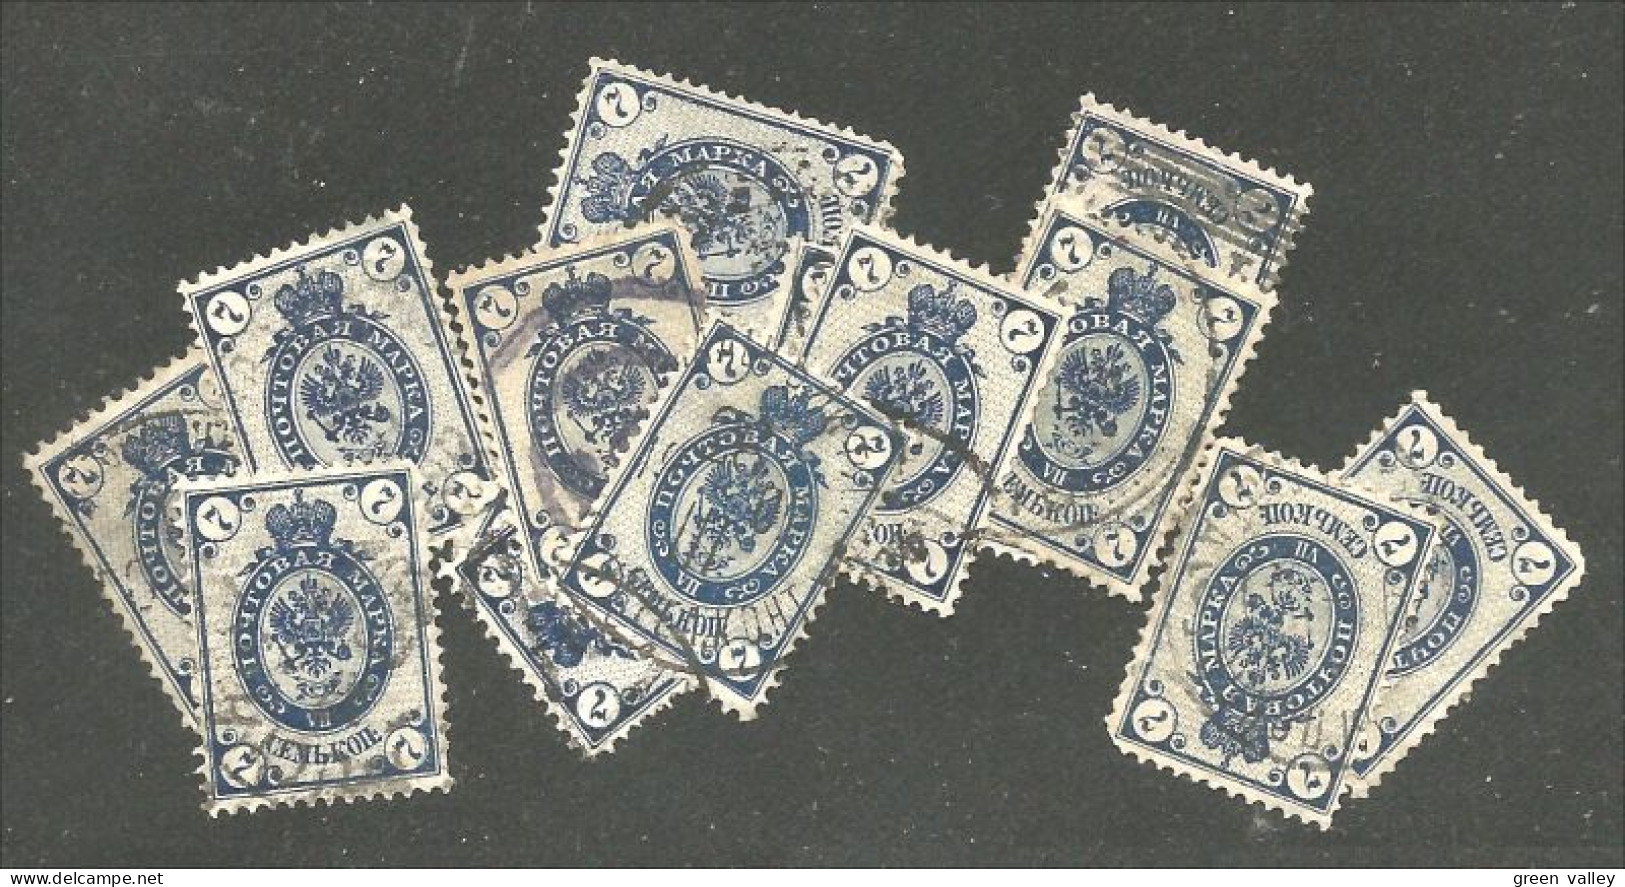 771 Russie 7k 1889 Blue 35+ Stamps For Study Aigle Imperial Eagle Post Horn Cor Postal (RUZ-341) - Usados